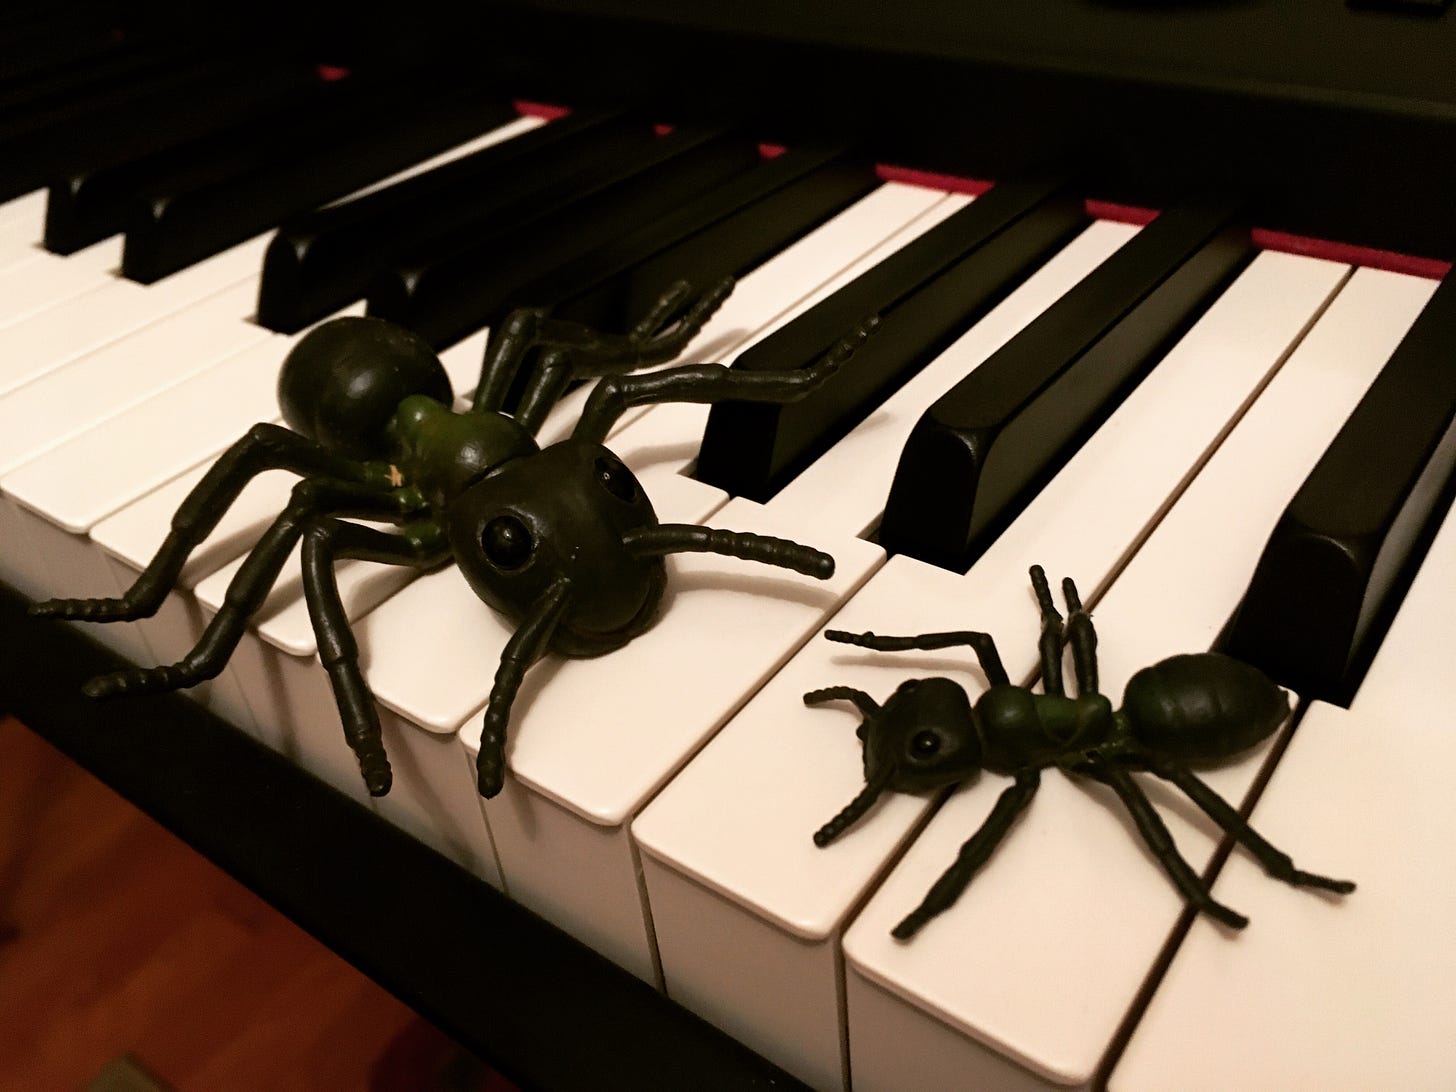 Old plastic ants on a piano keyboard.